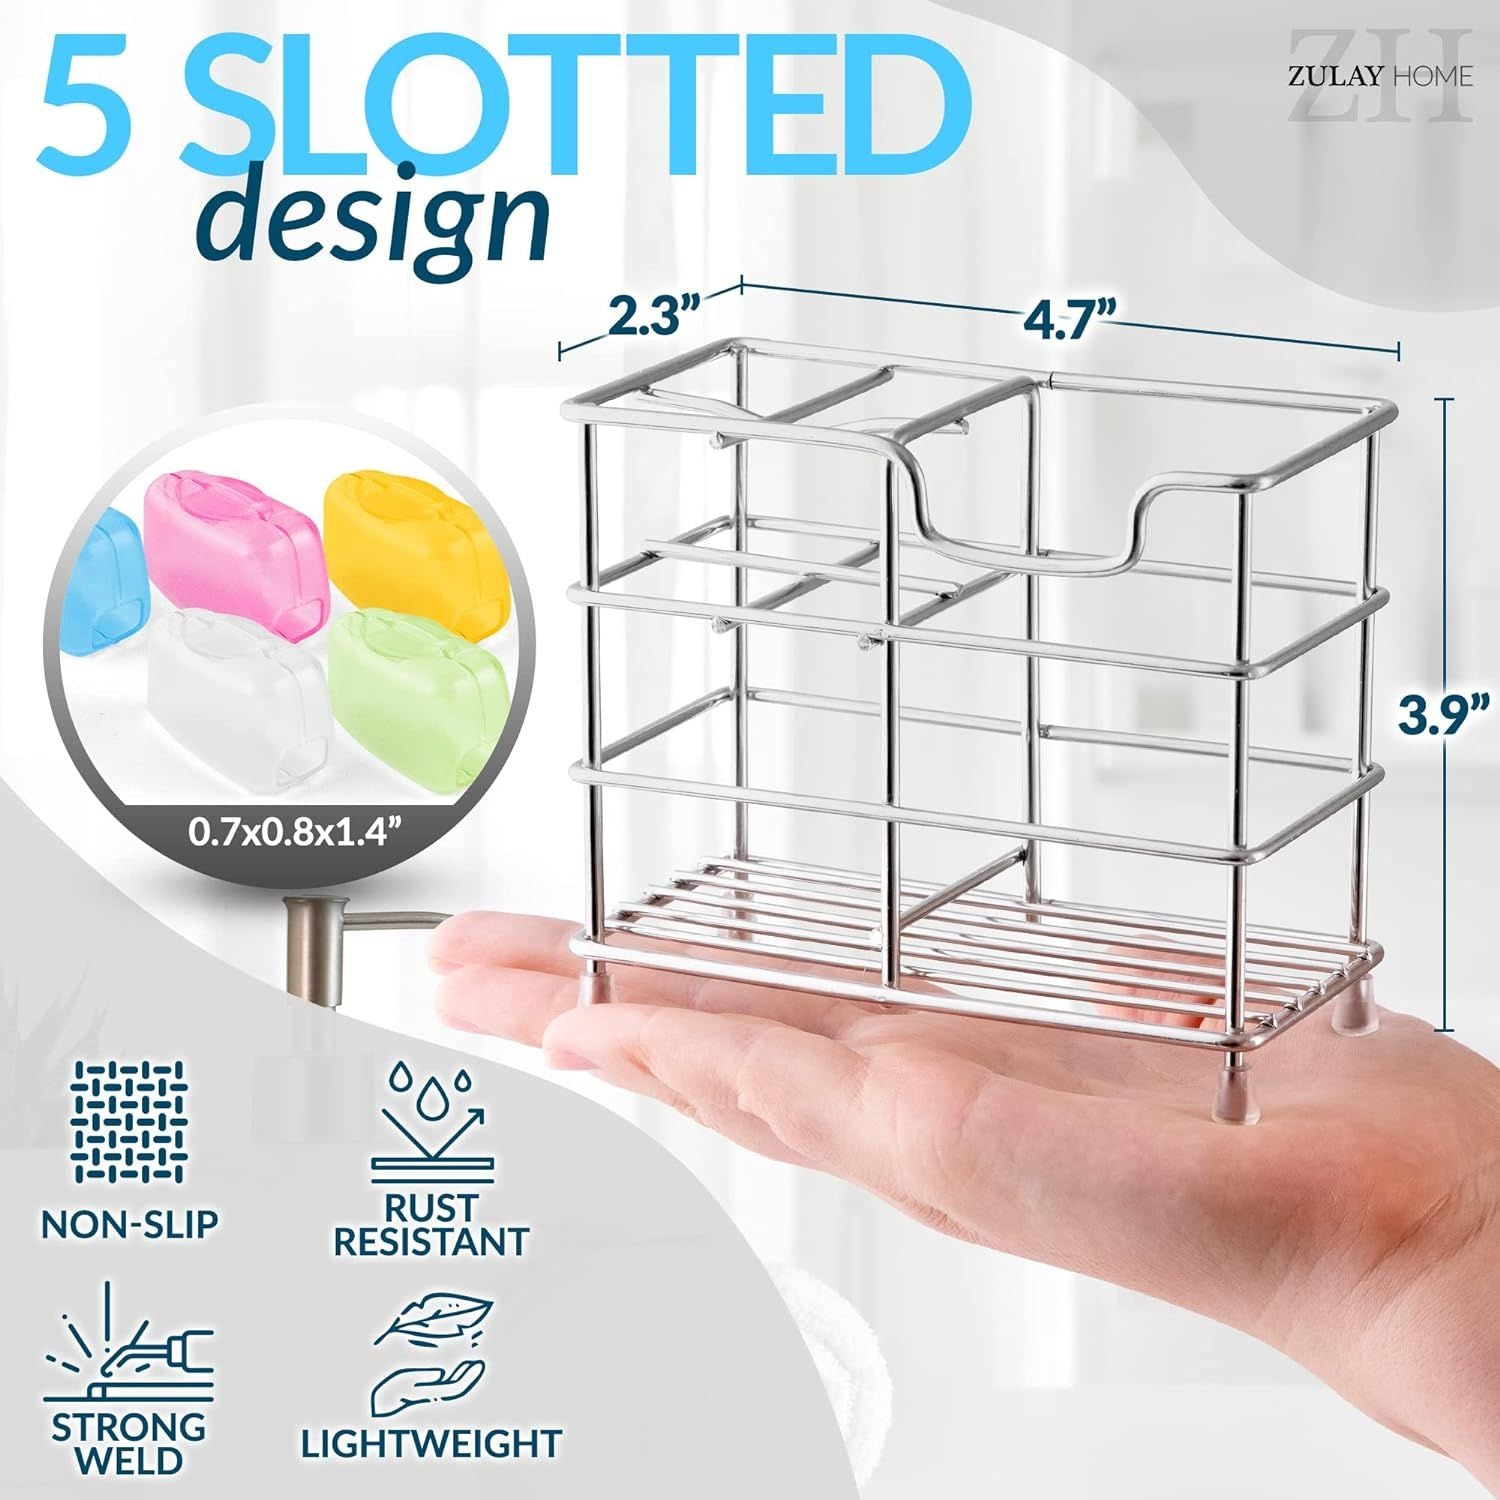 5 slotted Toothpaste and Toothbrush Holder